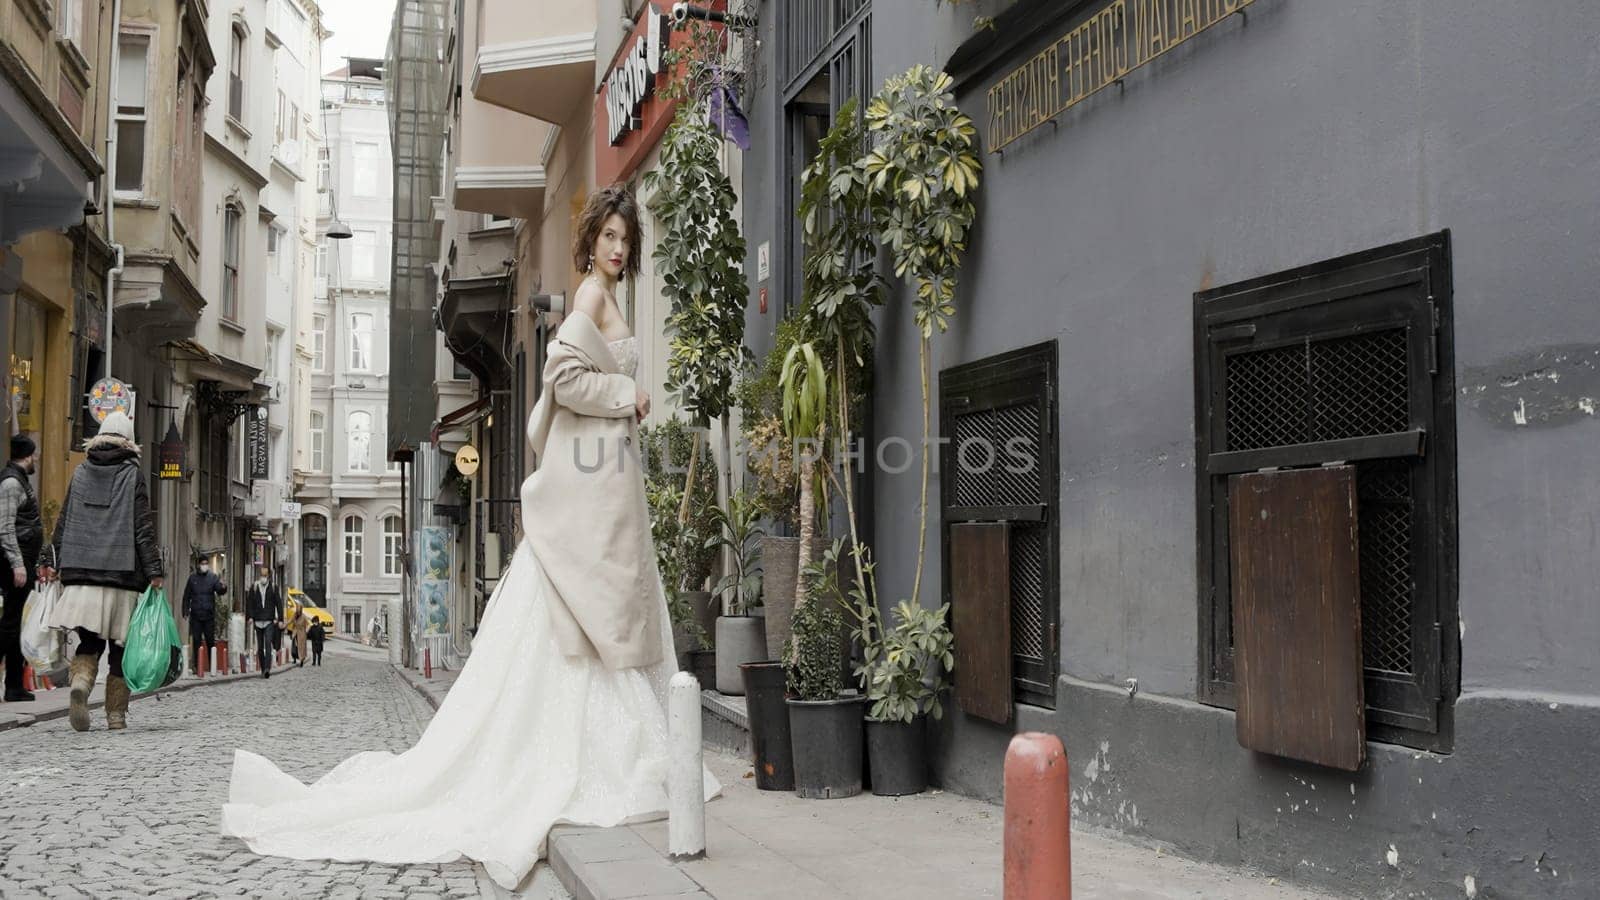 Turkey, Istanbul - July 27, 2022: Young fashionable luxury girl bride in elegant long wedding white dress in the narrow street of the old city. Action. Brunette woman standing during wedding photo shooting. by Mediawhalestock